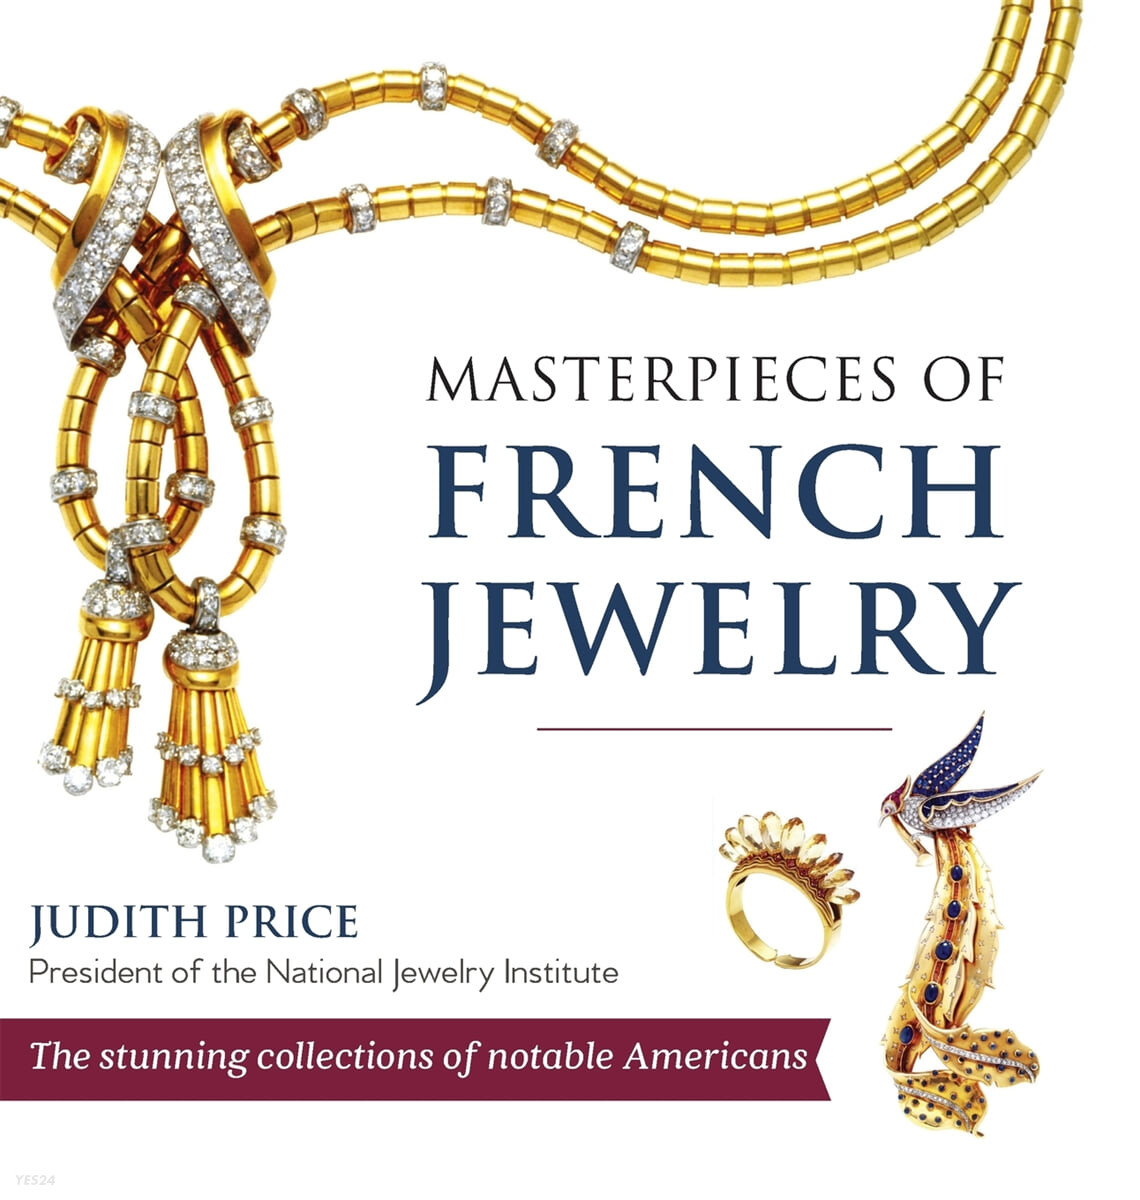 Masterpieces of French Jewelry